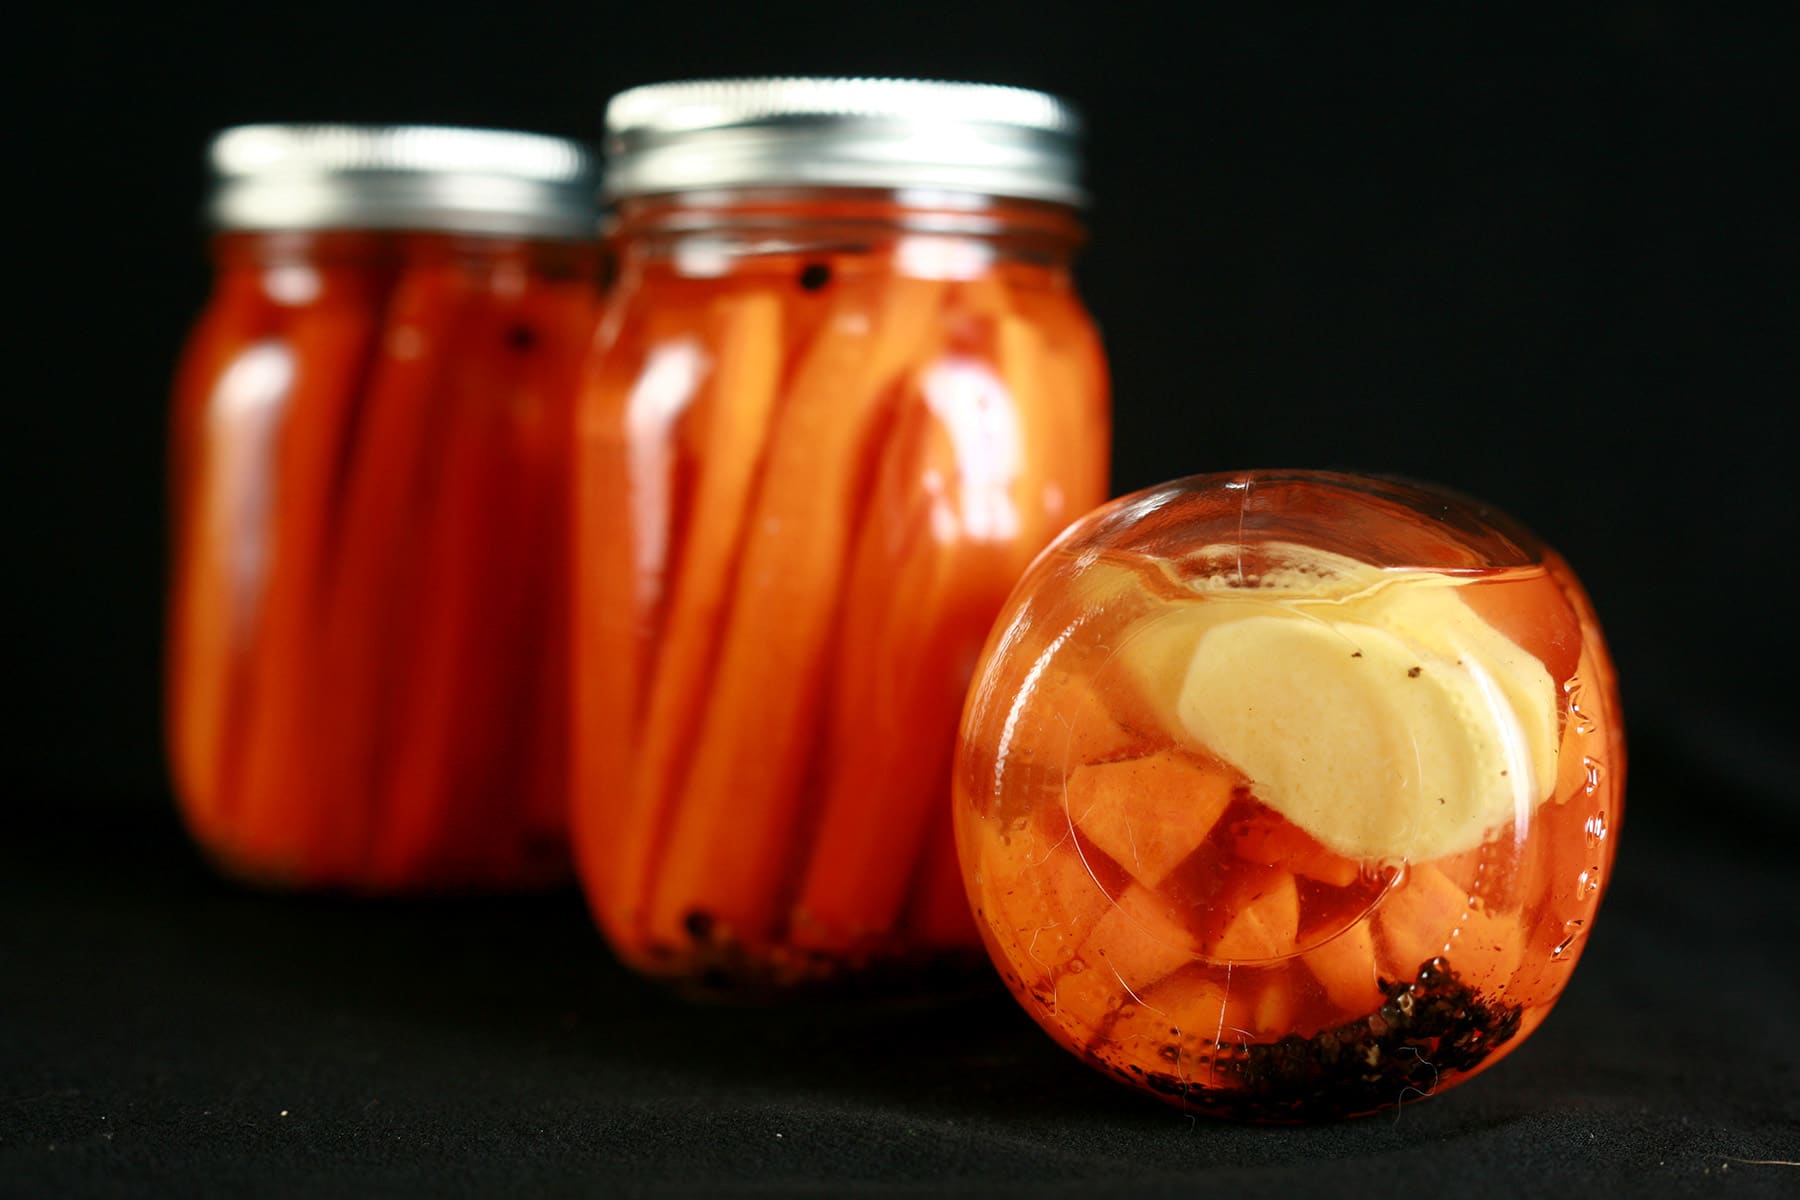 3 jars of homemade pickled carrots. One is on its side, slices of fresh ginger are visible on the bottom.